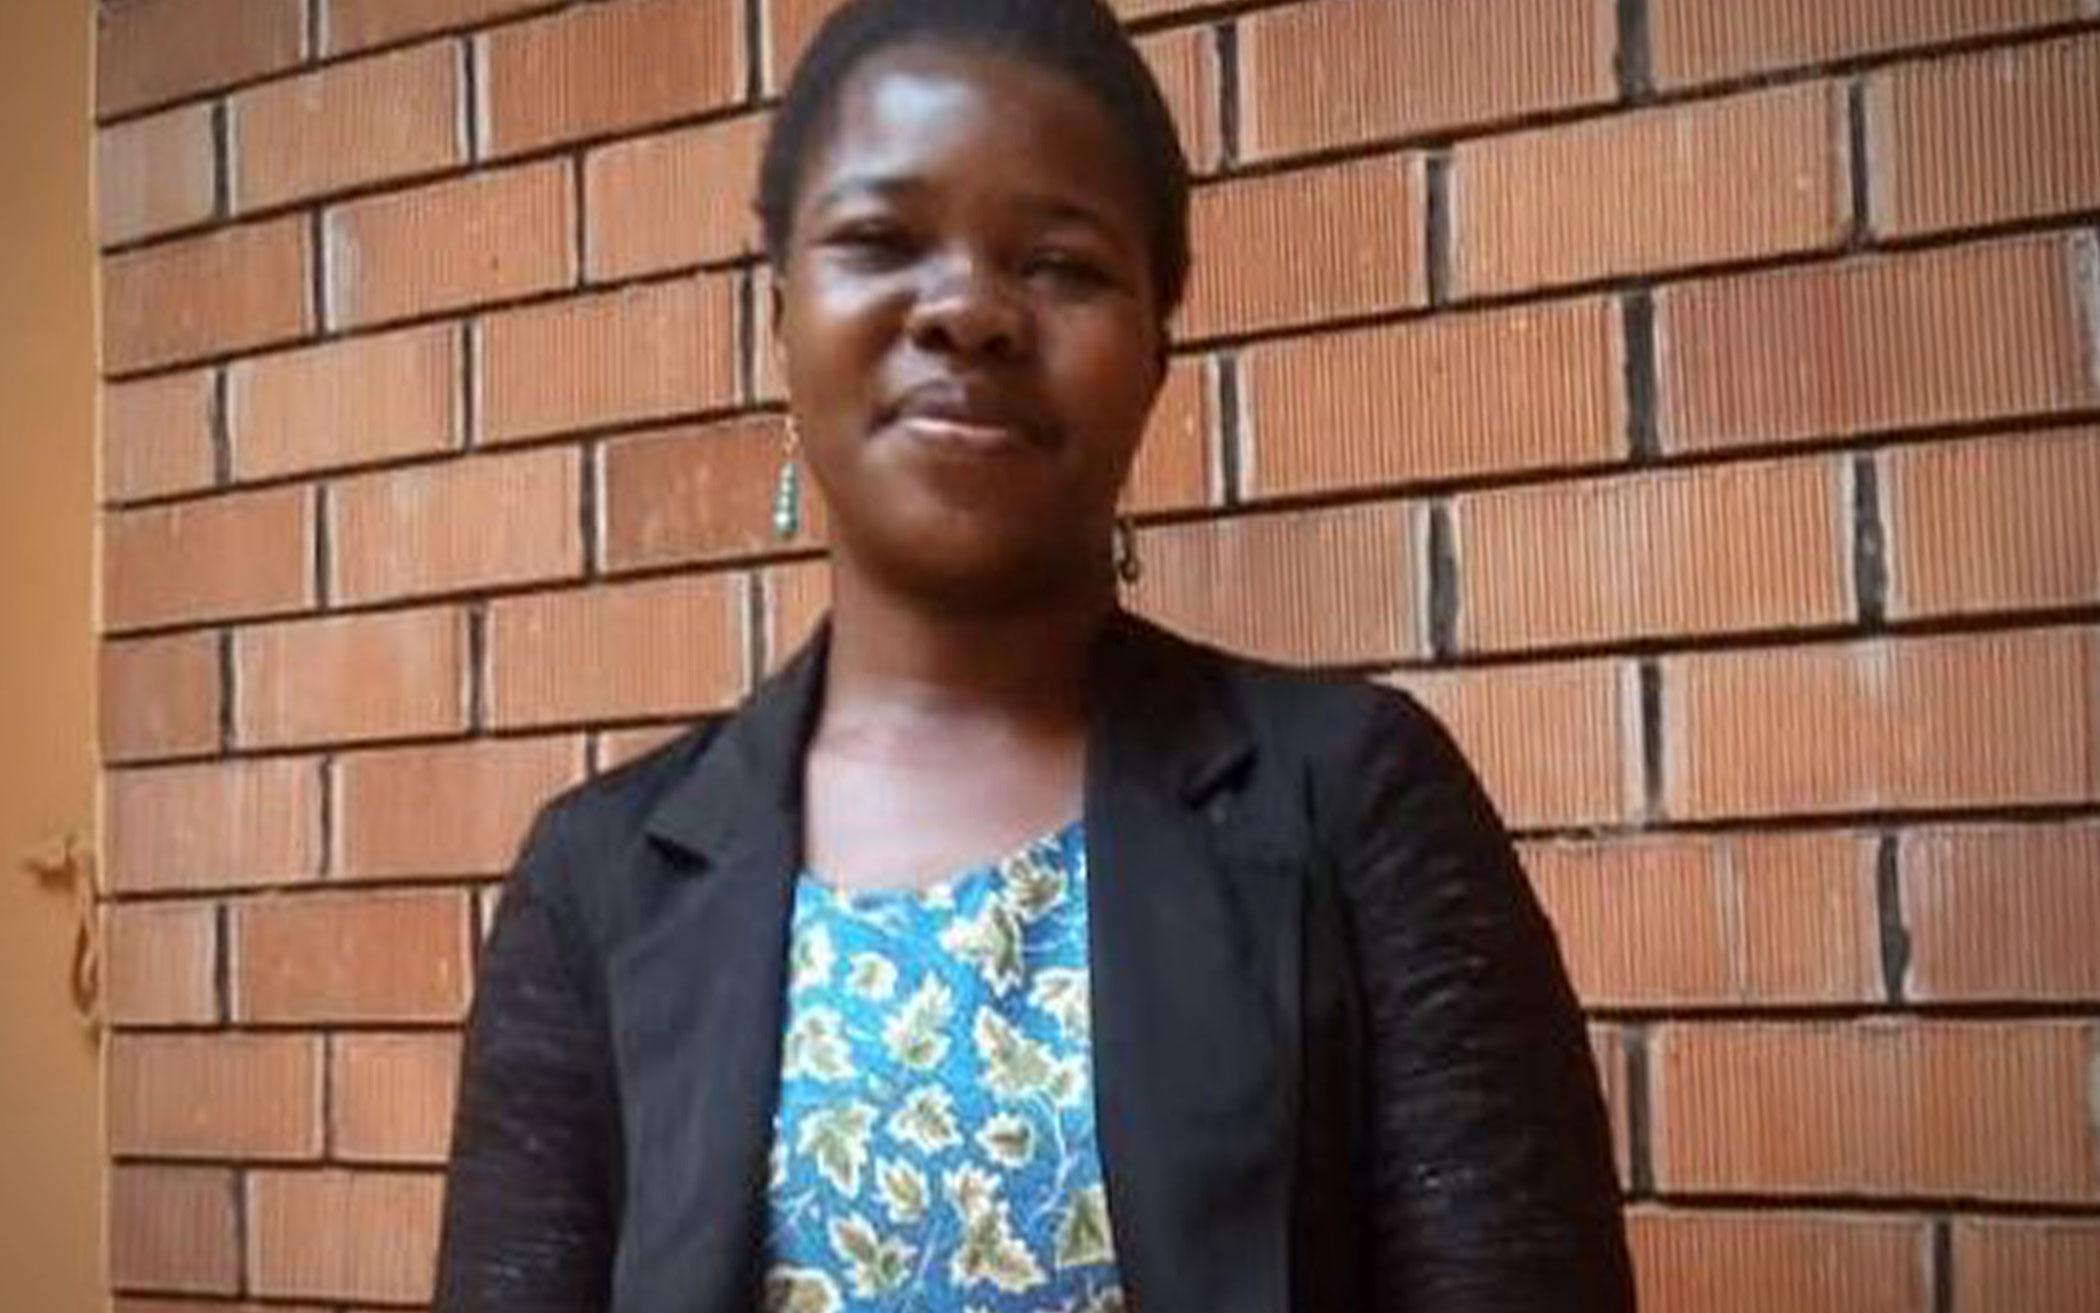 Gloria in Uganda worked with our ministry partner, Relay Trust, to complete a TLT course via WhatsApp. Her testimony is one of personal change: “Before the course was introduced, I was going through a difficult time. I was spiritually down, and I could not bring myself to read the Word of God or even pray. I needed so much to get off this misery or change my situation. (When I agreed to study this manual, I did not know) it would require me to read the Word of God more, to pray and pray for...